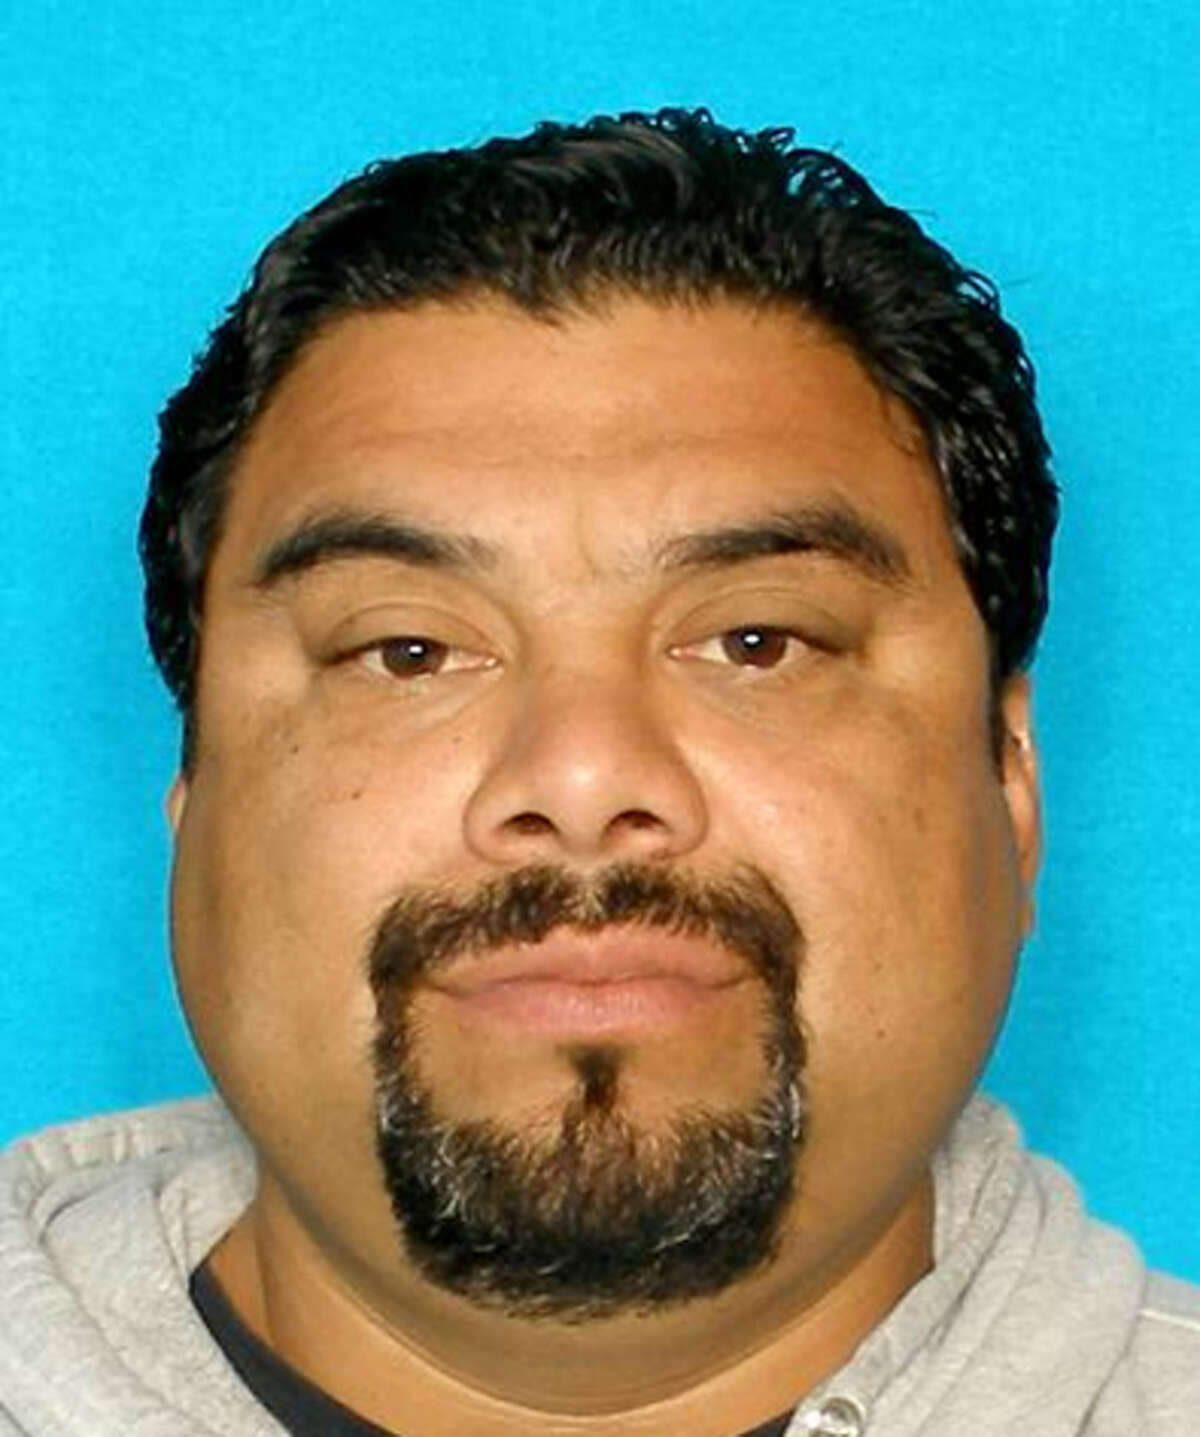 SAPD identified Larry Castro, 40, as a suspect in the death of Juan Romero on Oct. 15 and issued a murder warrant for him.